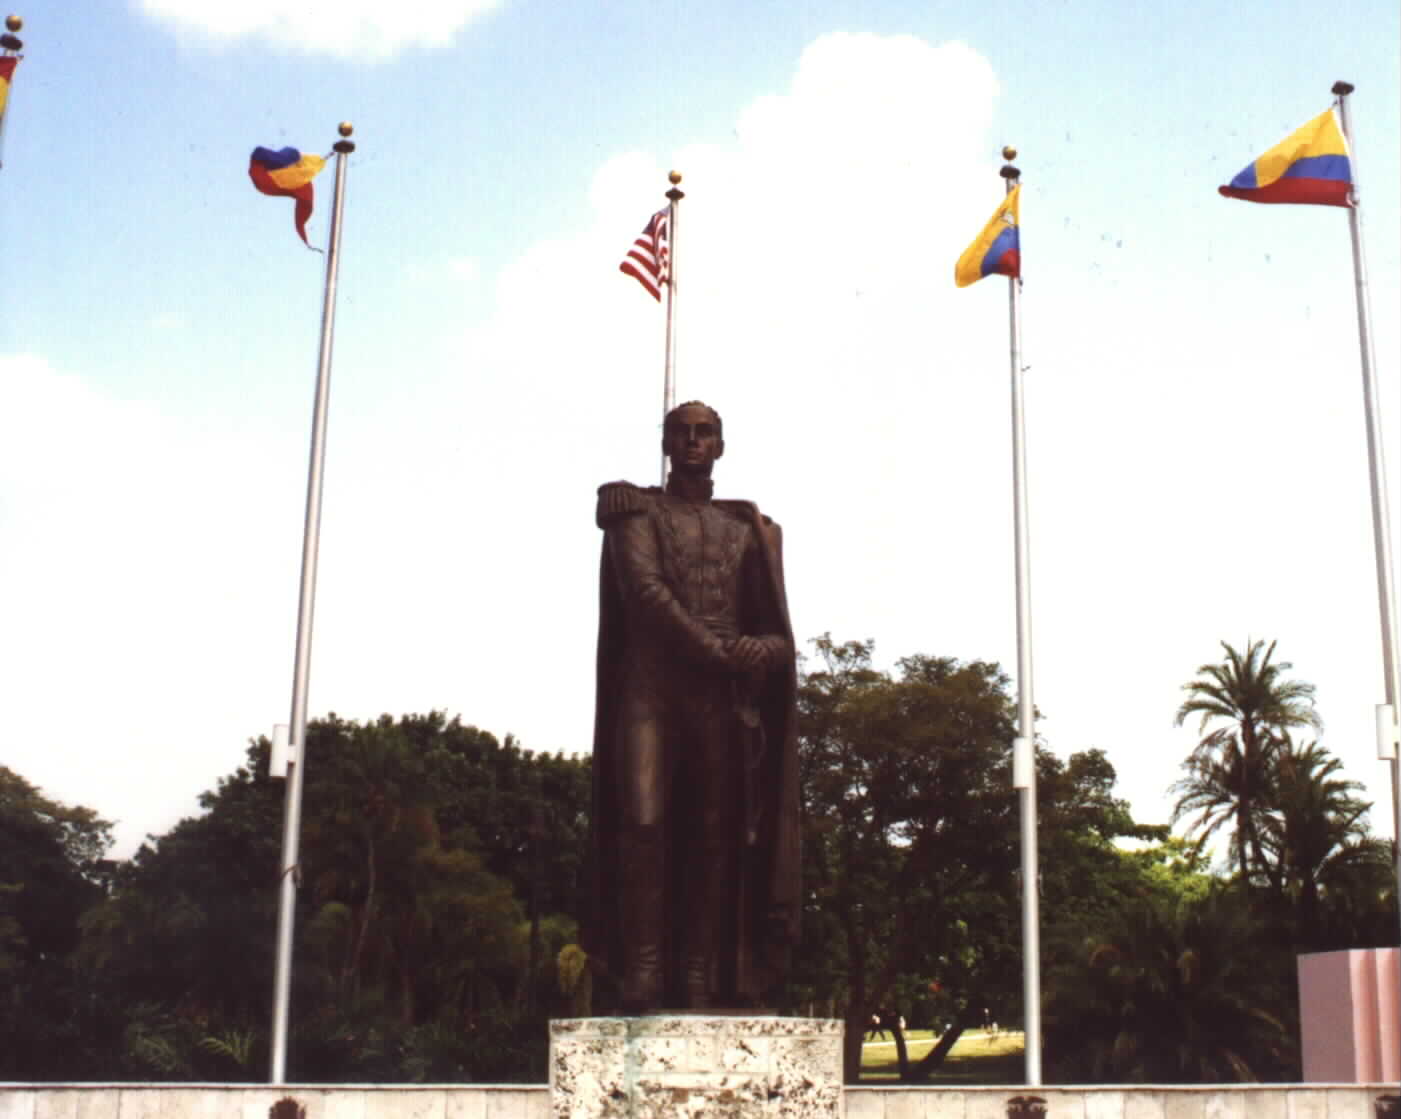 (Photographed by Noe' Dorestant: Statue of Simon Bolivar the Liberator in Miami)Picture photographed
and provided by Noe Dorestant, if you copy for reuse, give credit where credit is due. 